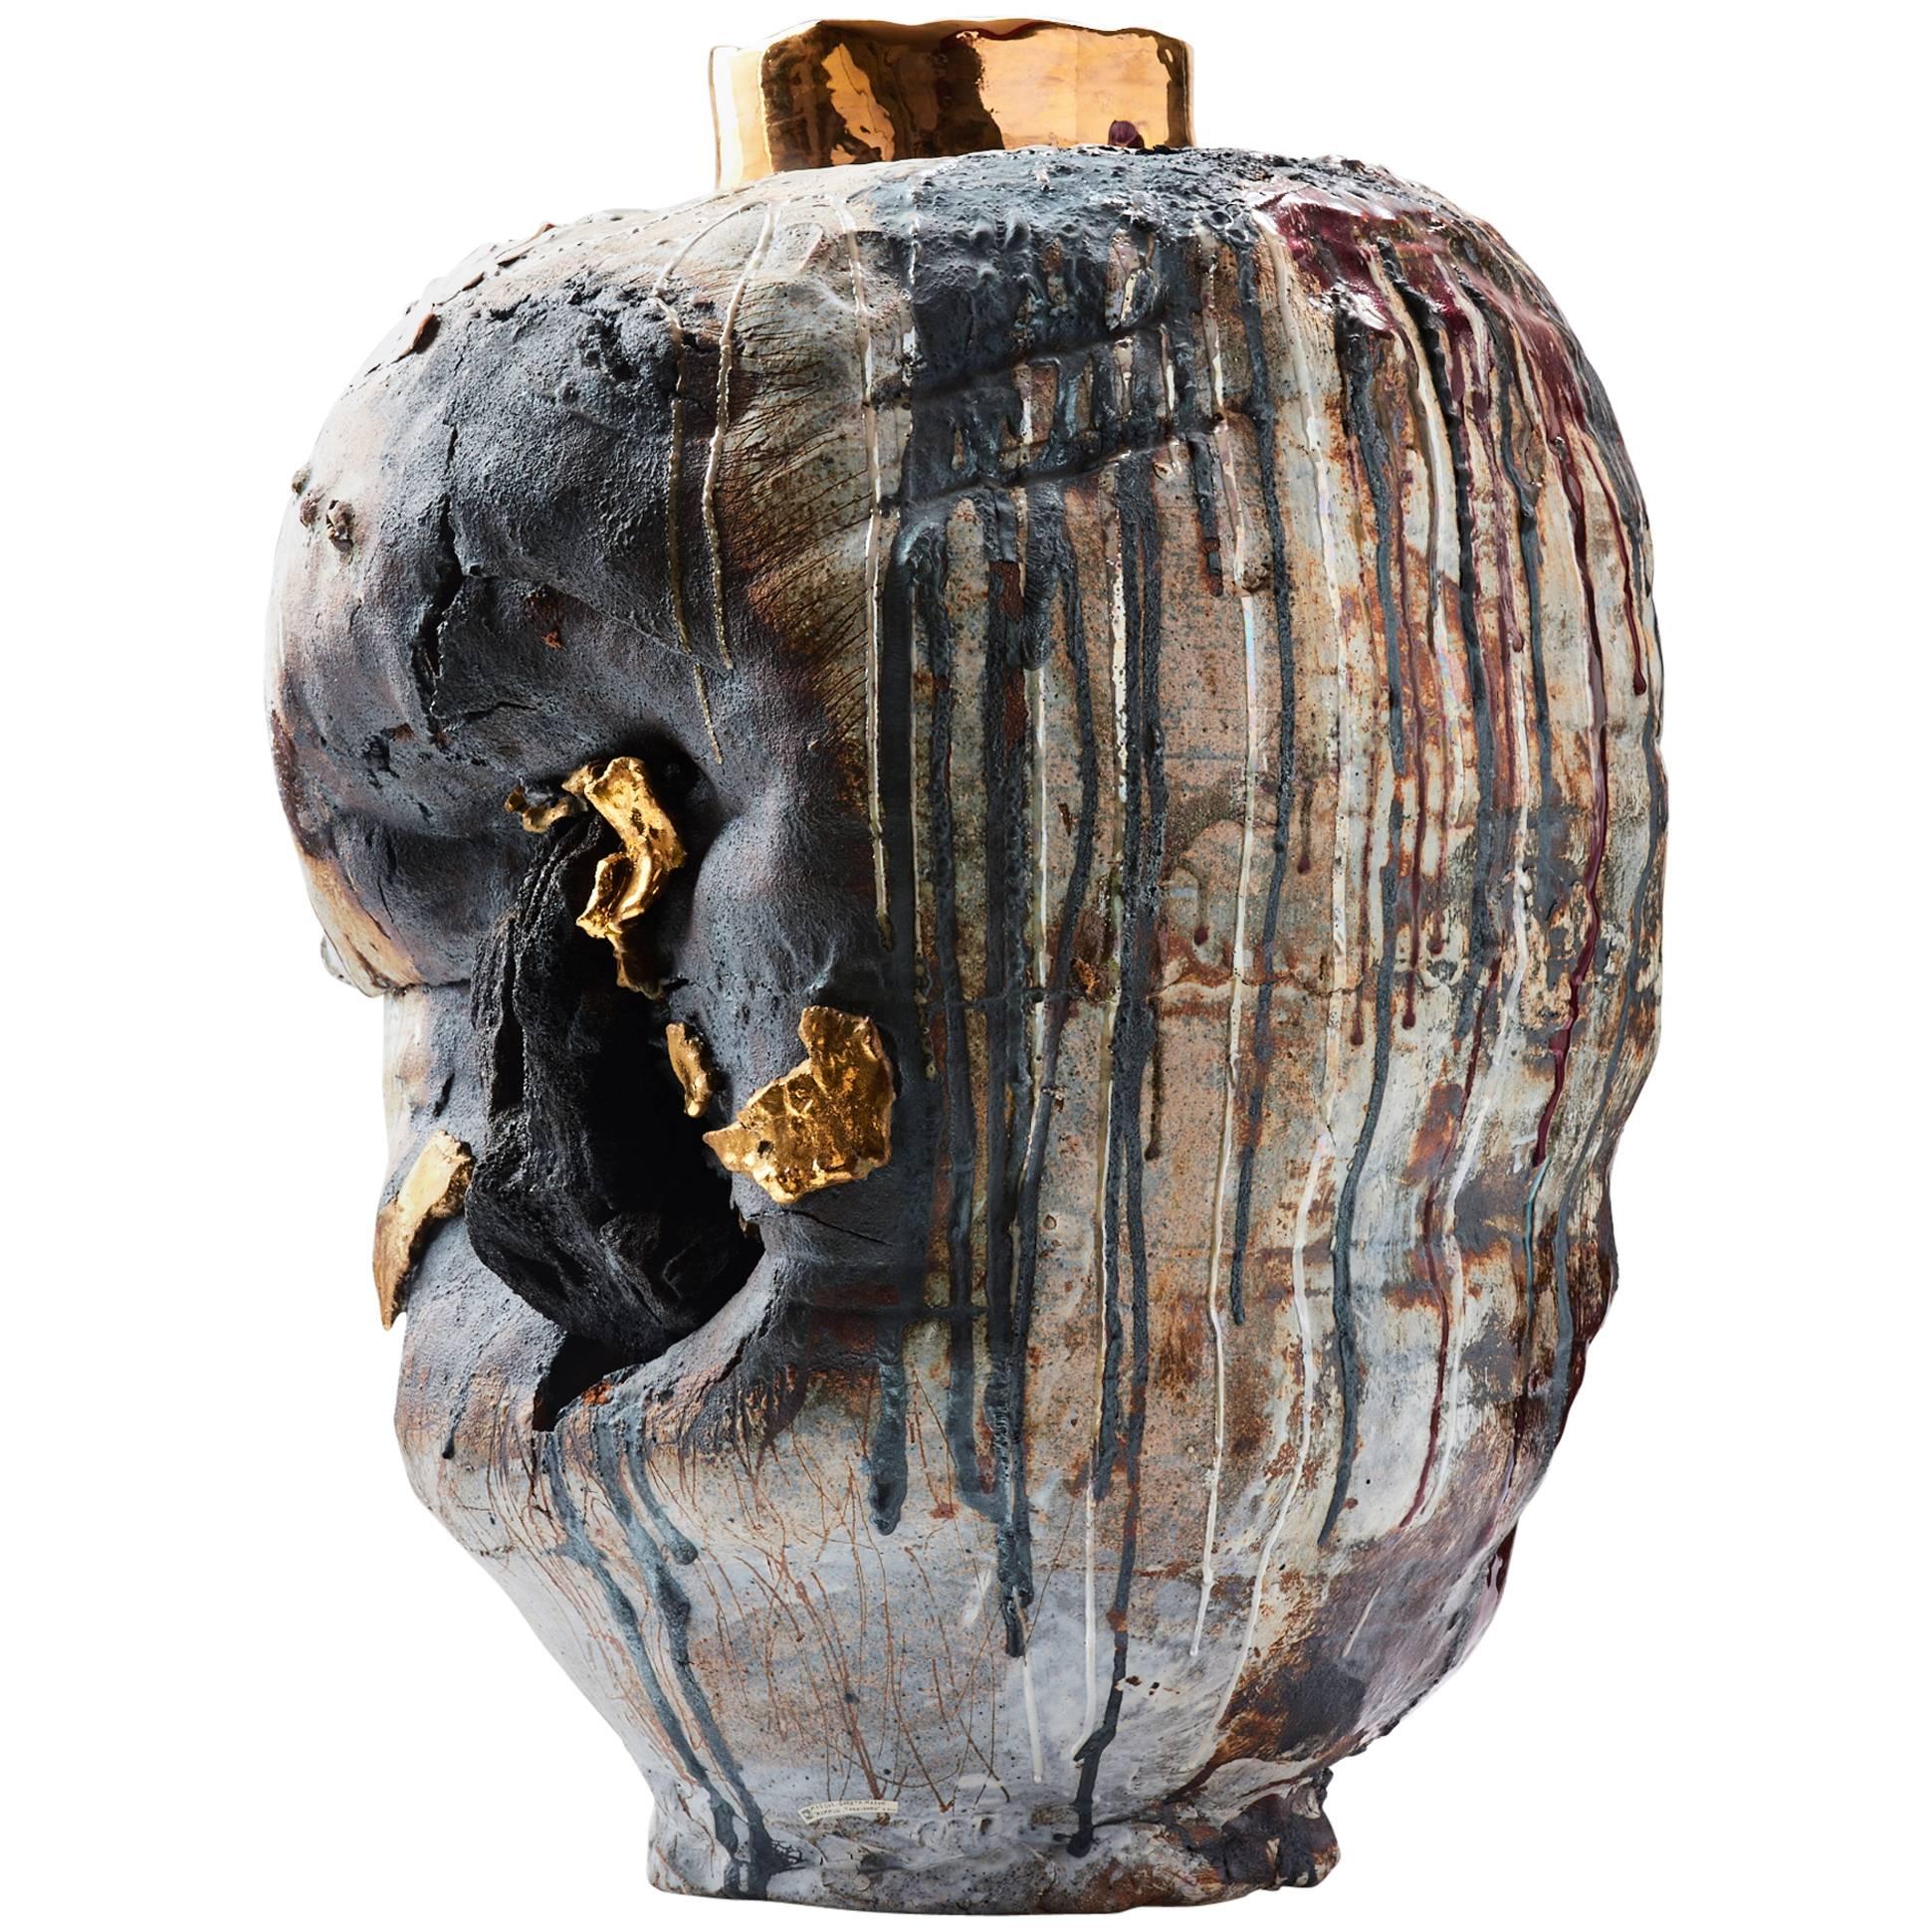 "Mammon, Tarnished Black Rock Series" Contemporary Porcelain Vessel by Gareth M For Sale